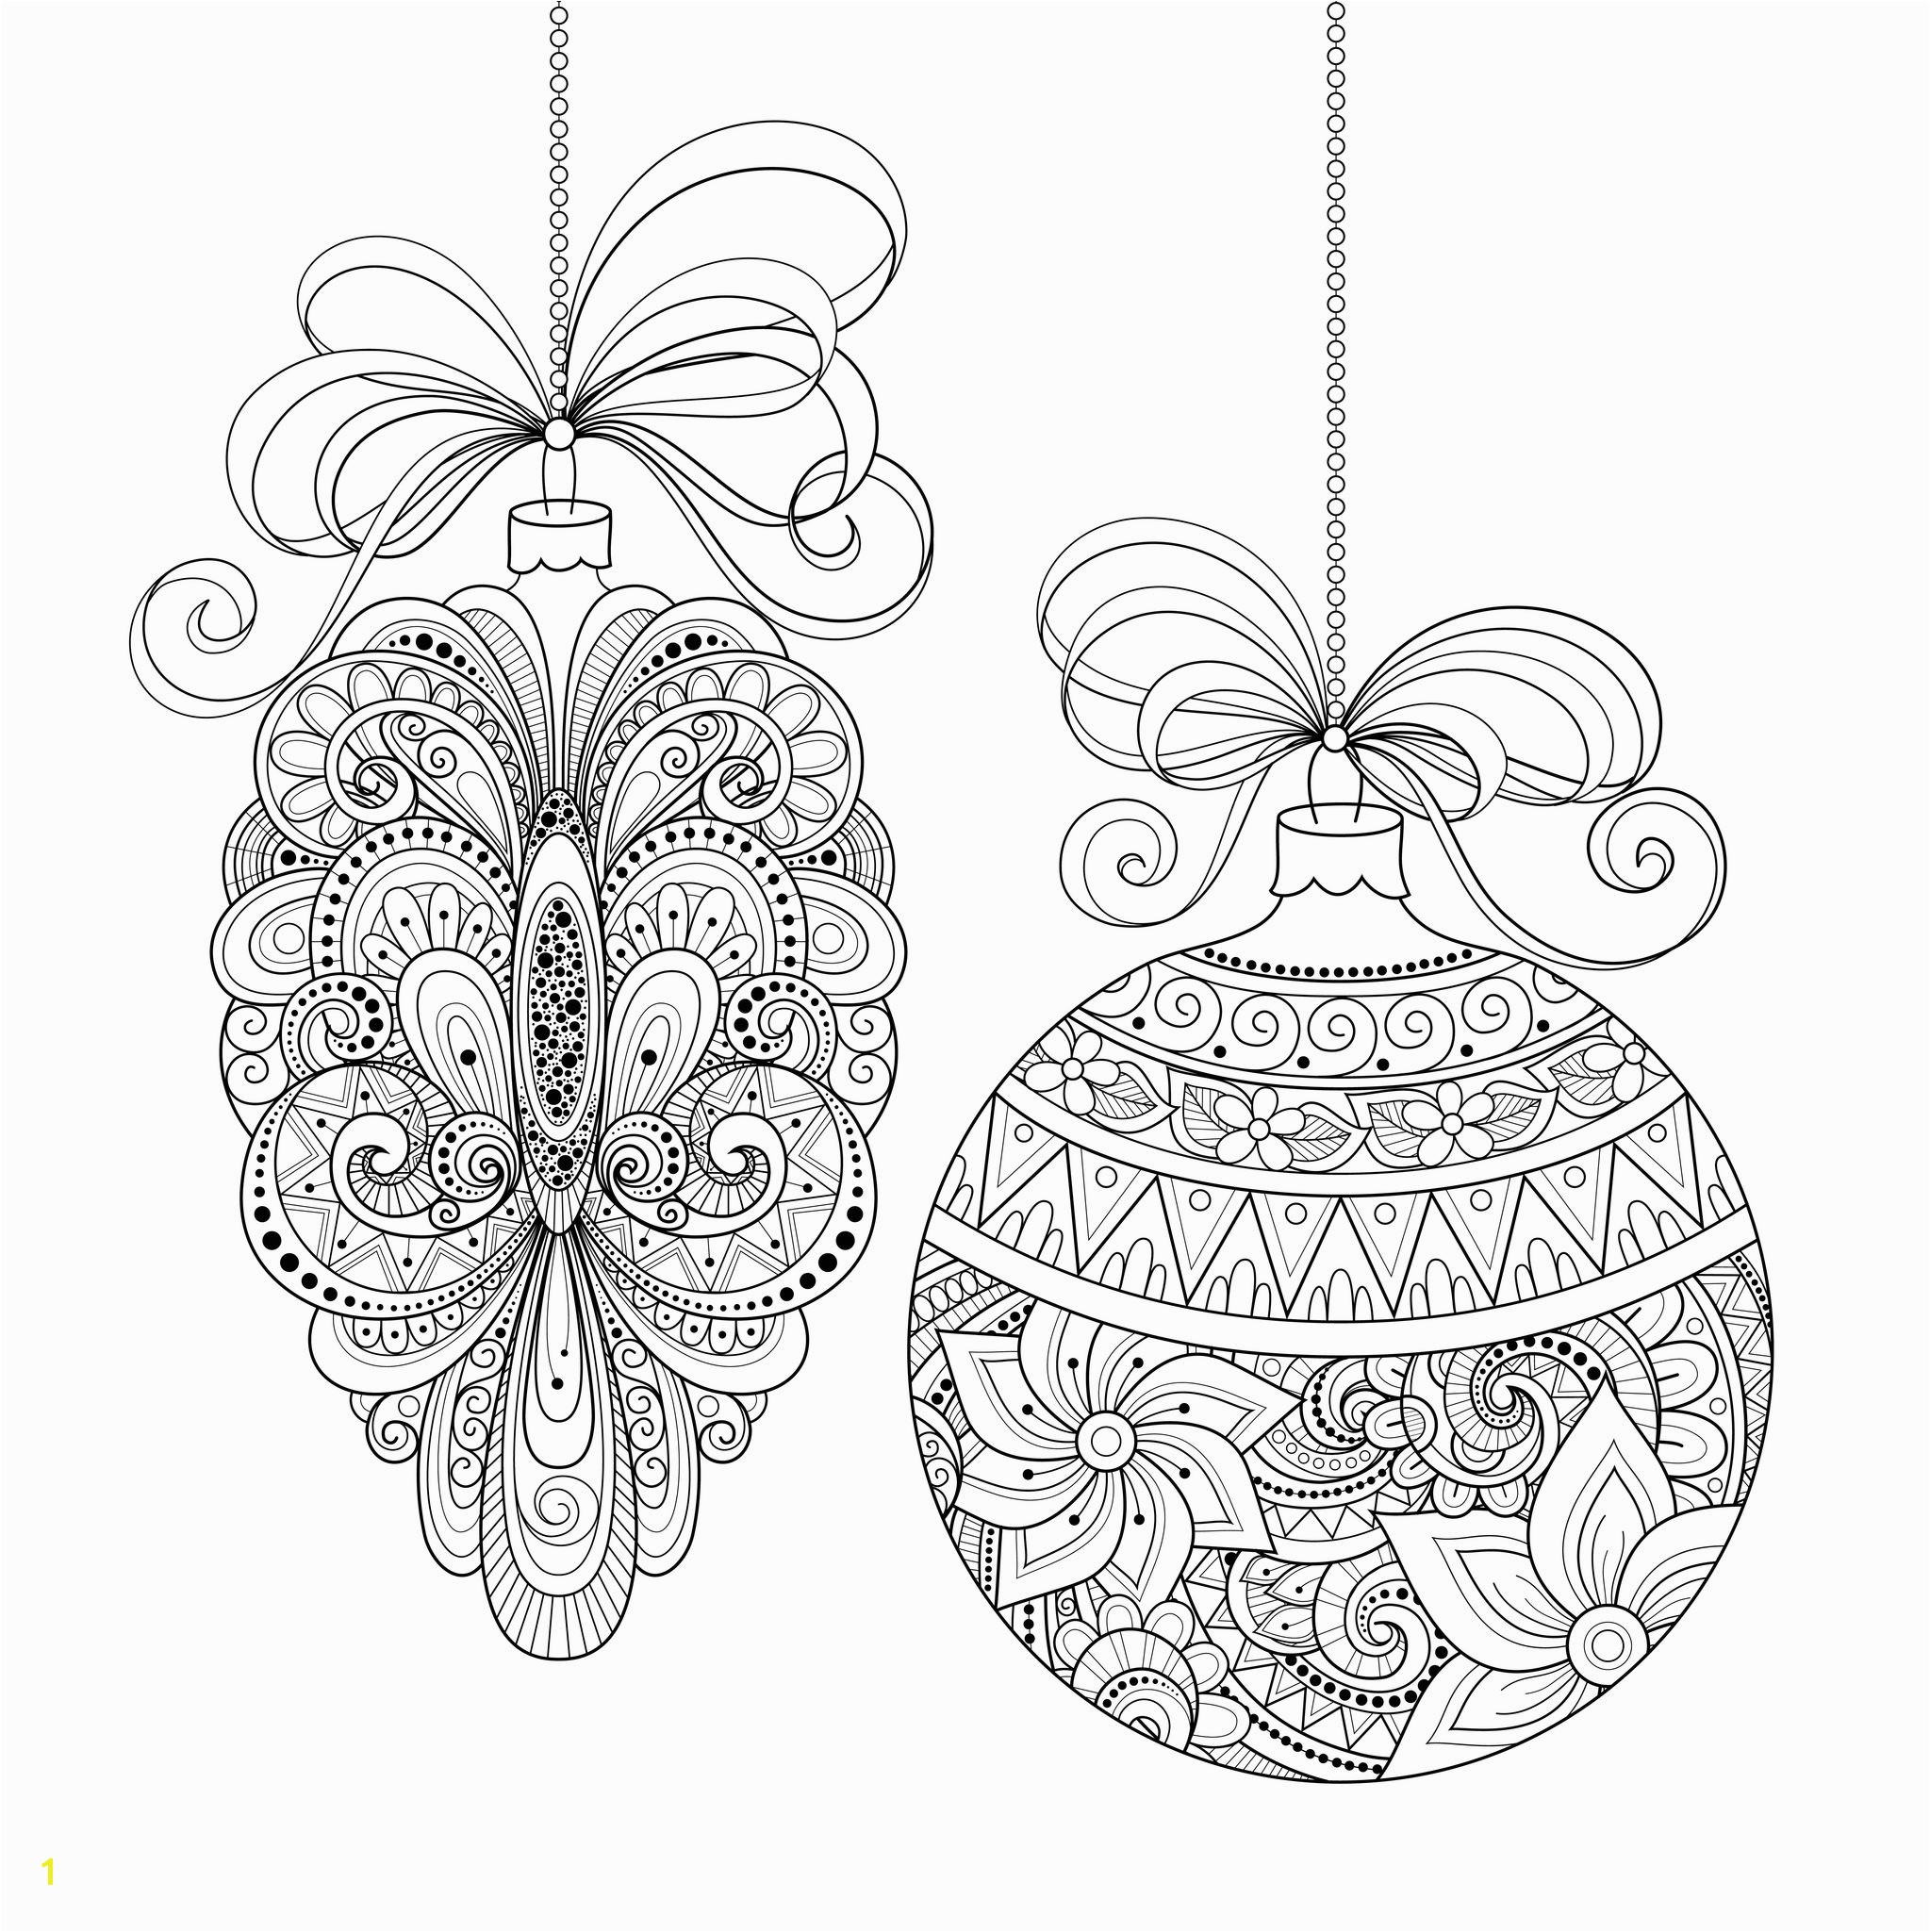 Christmas ornaments use this coloring page to make your own greeting cards